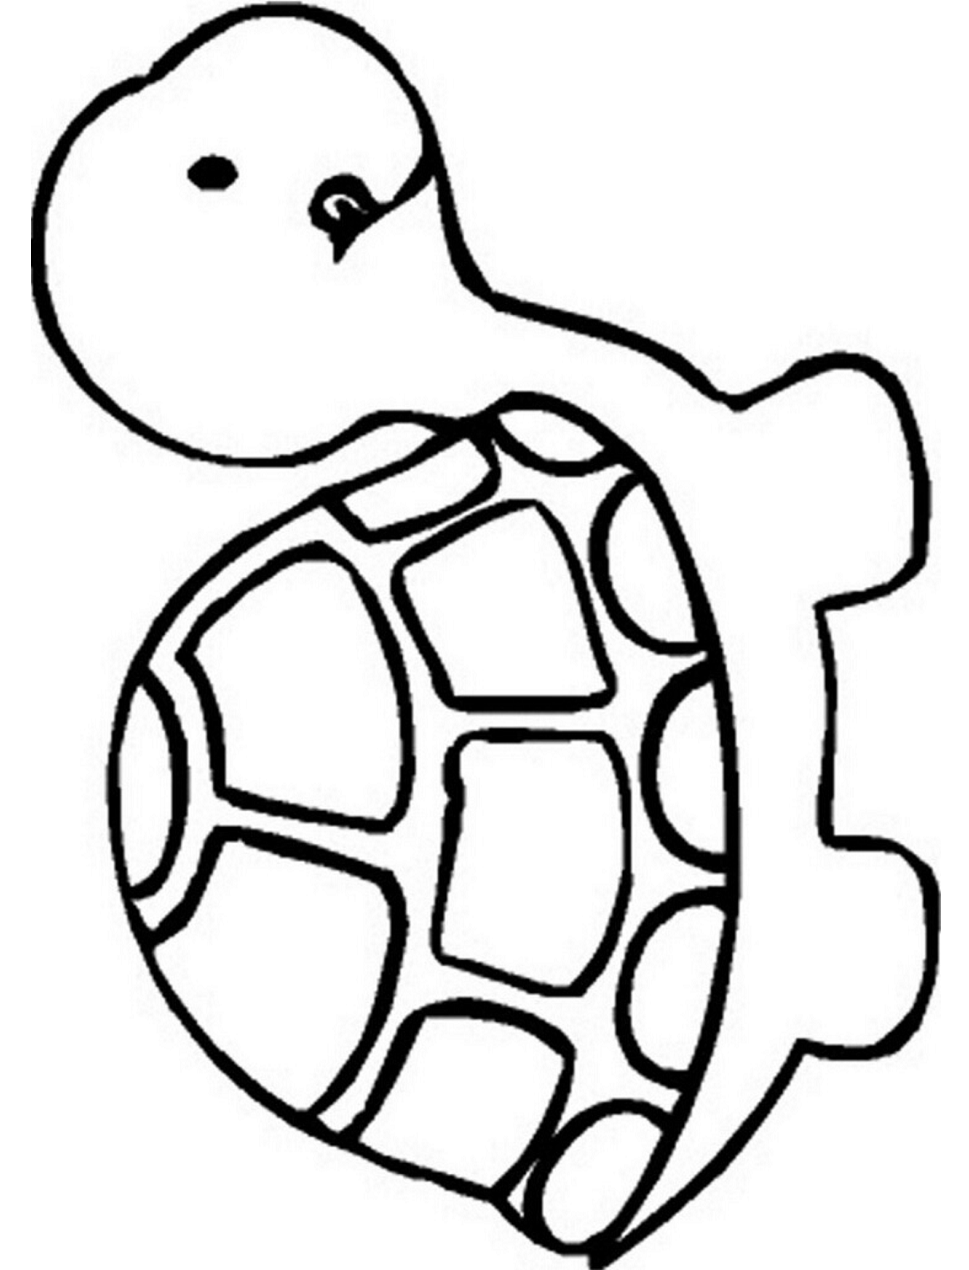 Easy Turtle Coloring Pages For Kids 719